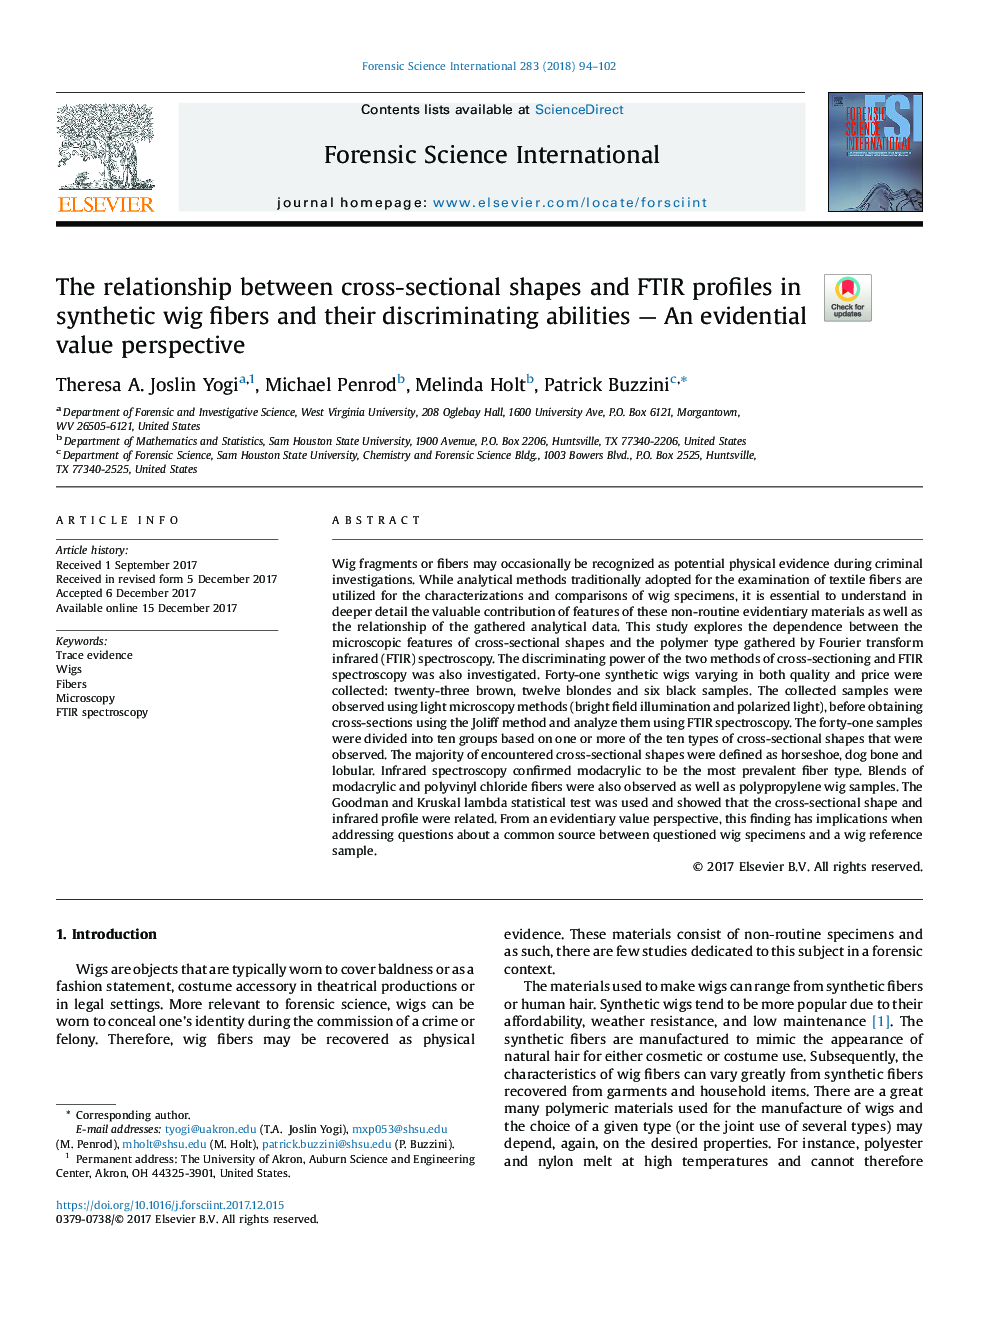 The relationship between cross-sectional shapes and FTIR profiles in synthetic wig fibers and their discriminating abilities - An evidential value perspective